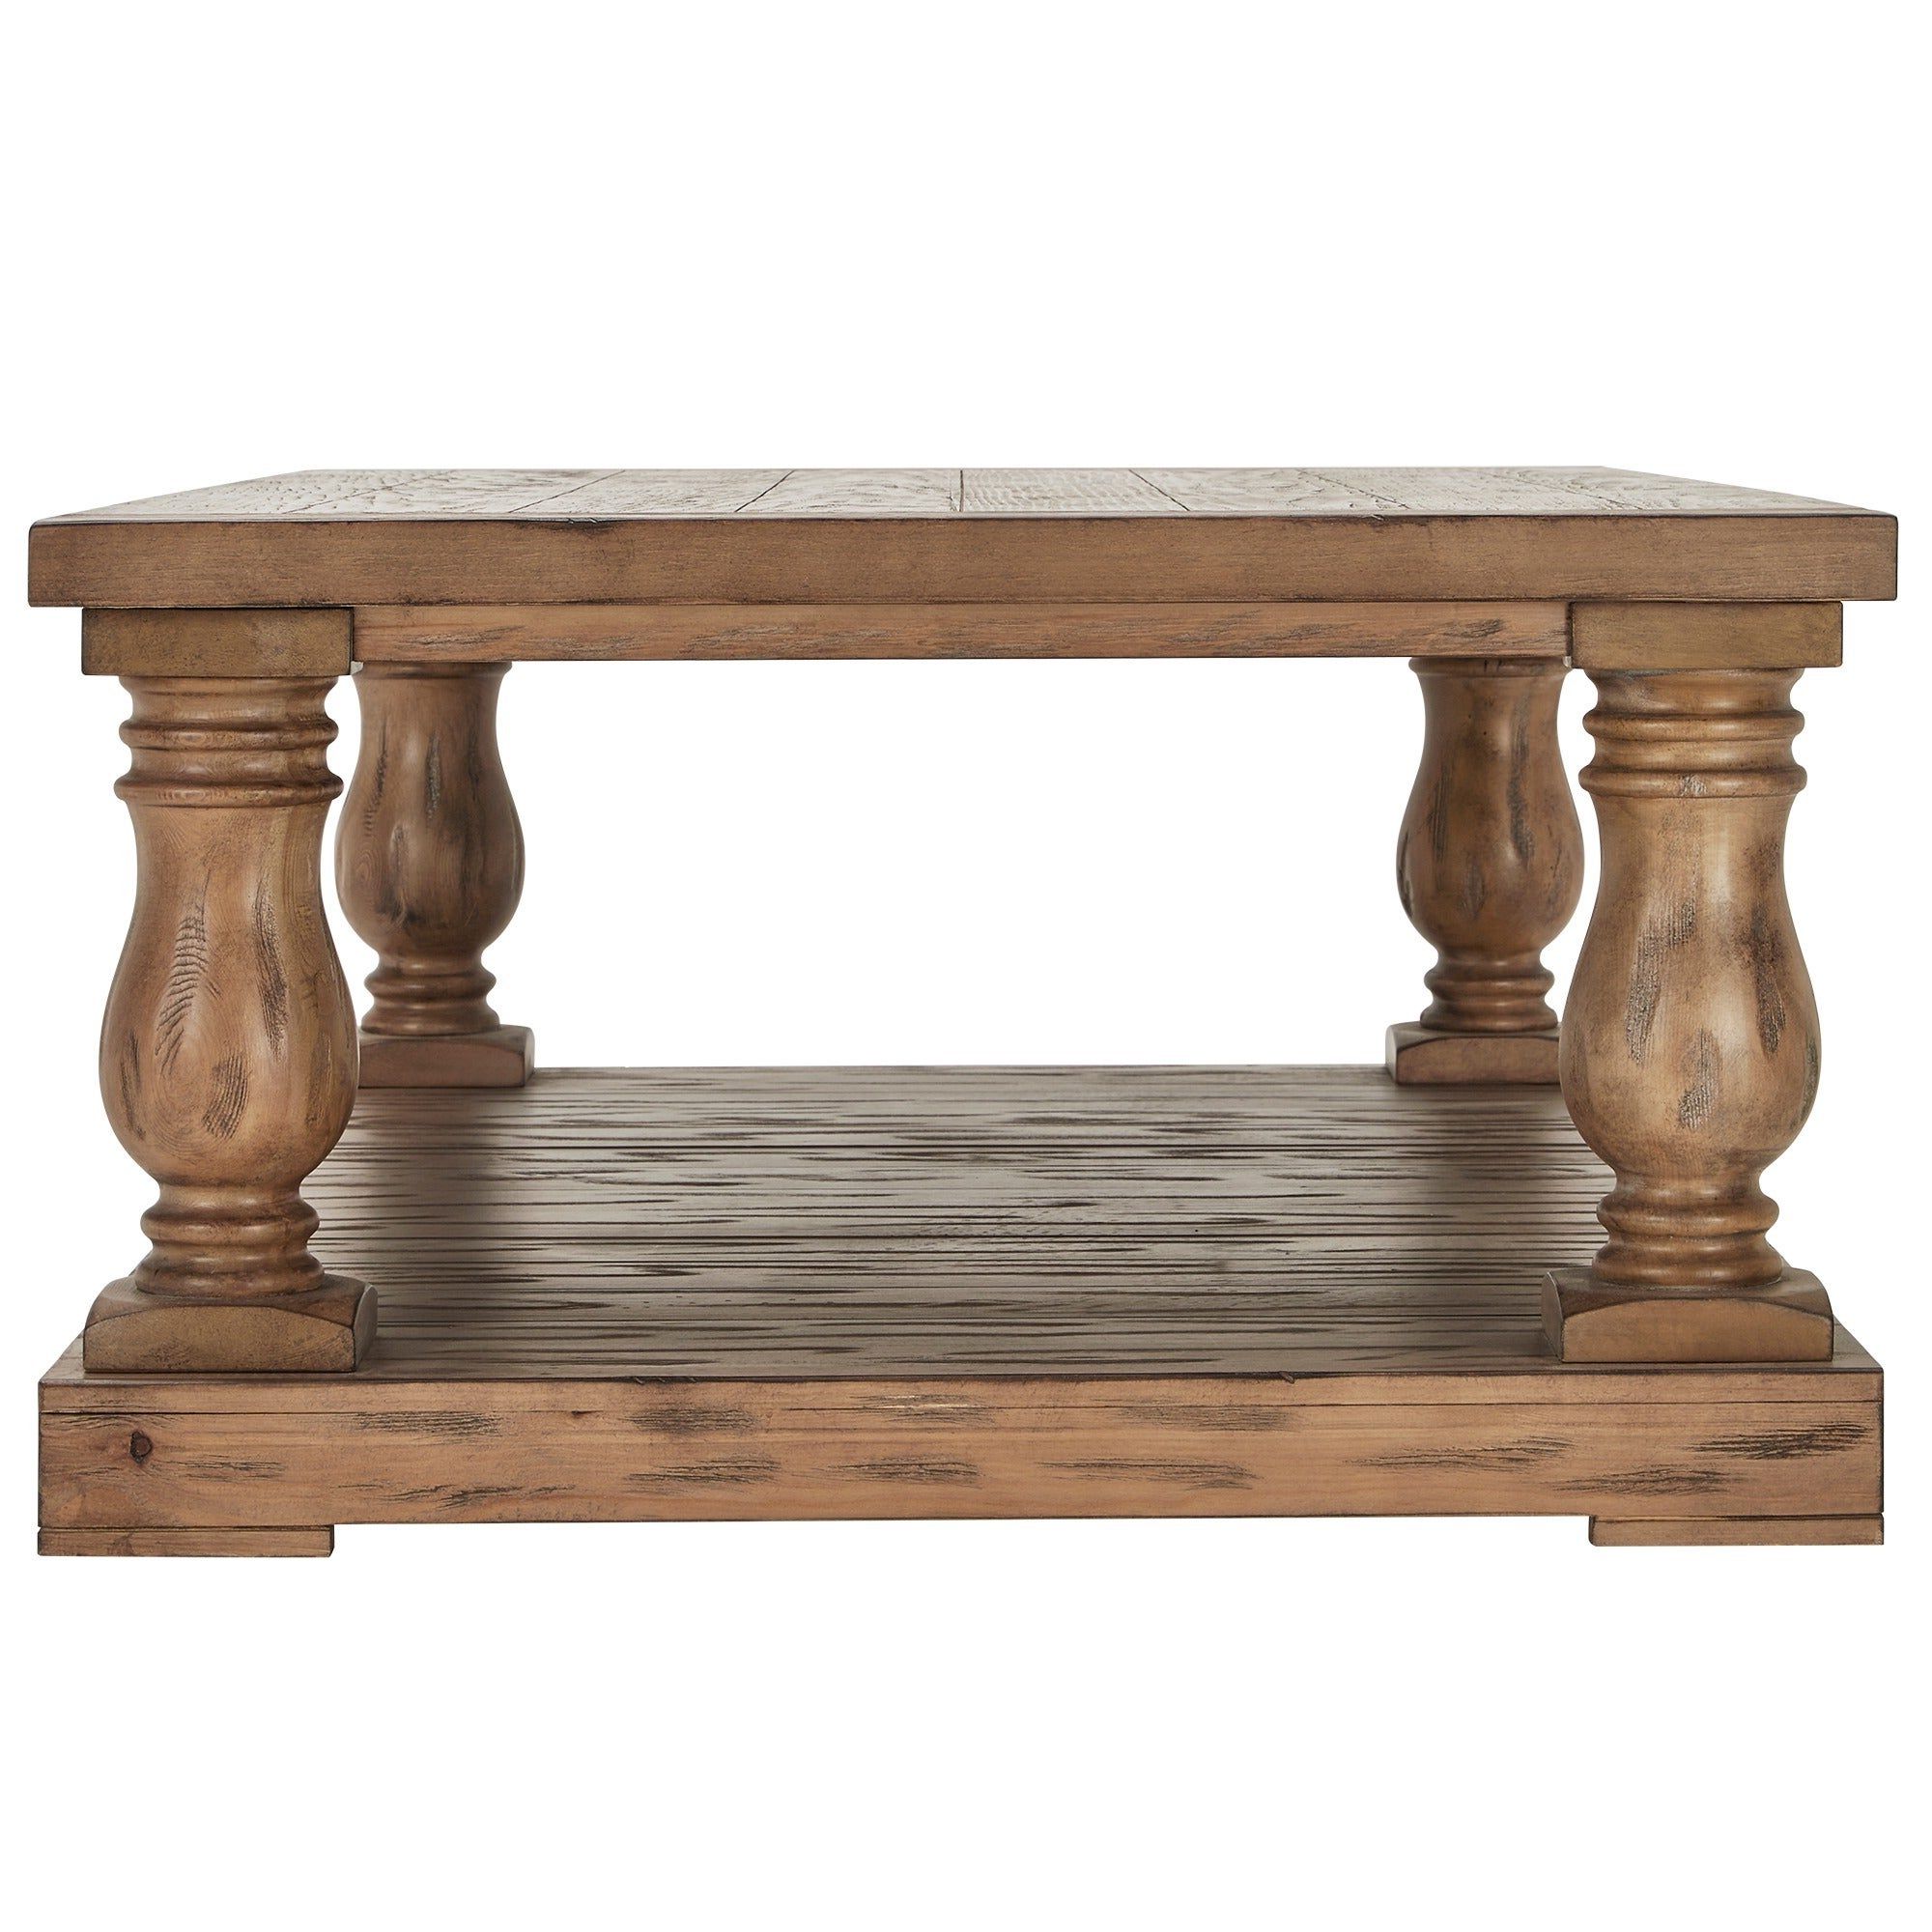 Edmaire Rustic Pine Baluster 55 Inch Coffee Tableinspire Q Artisan With Regard To Most Up To Date Edmaire Rustic Pine Baluster Coffee Tables (View 4 of 20)